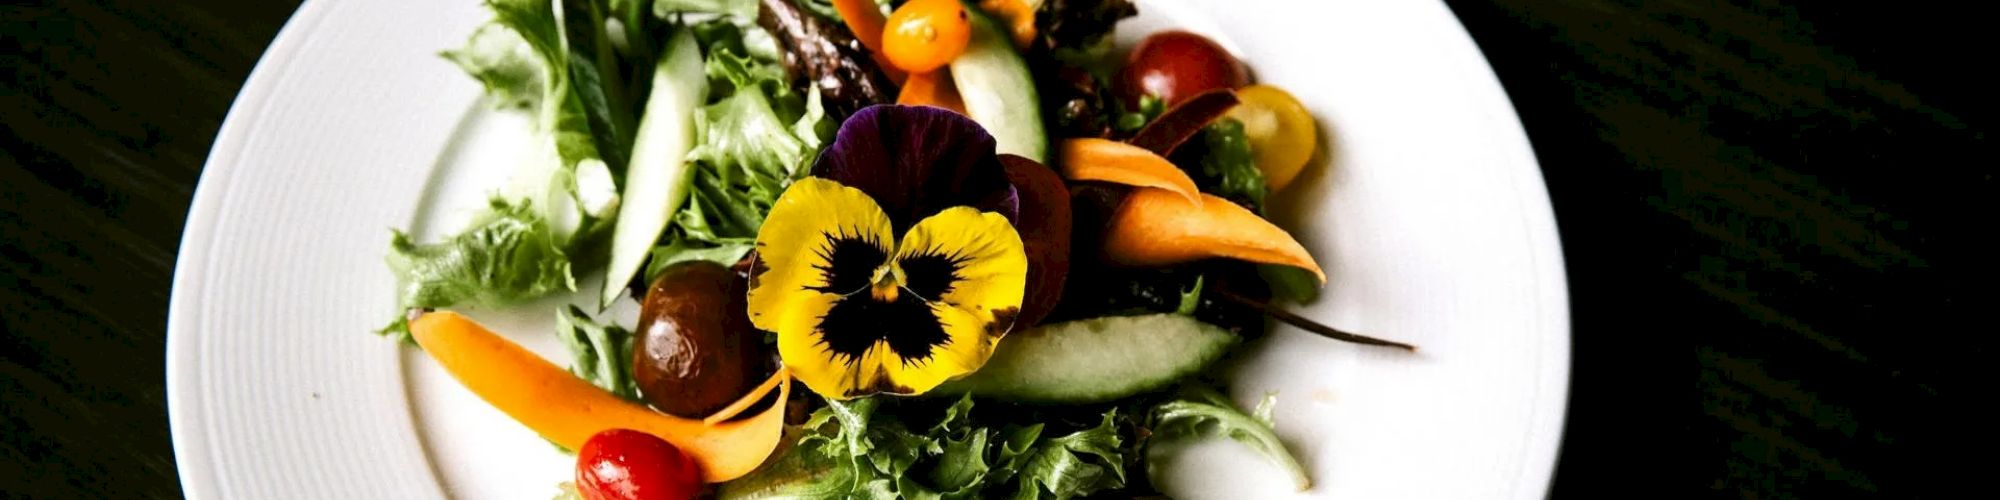 A fresh salad with mixed greens, cherry tomatoes, carrots, cucumber slices, and an edible flower on a white plate.